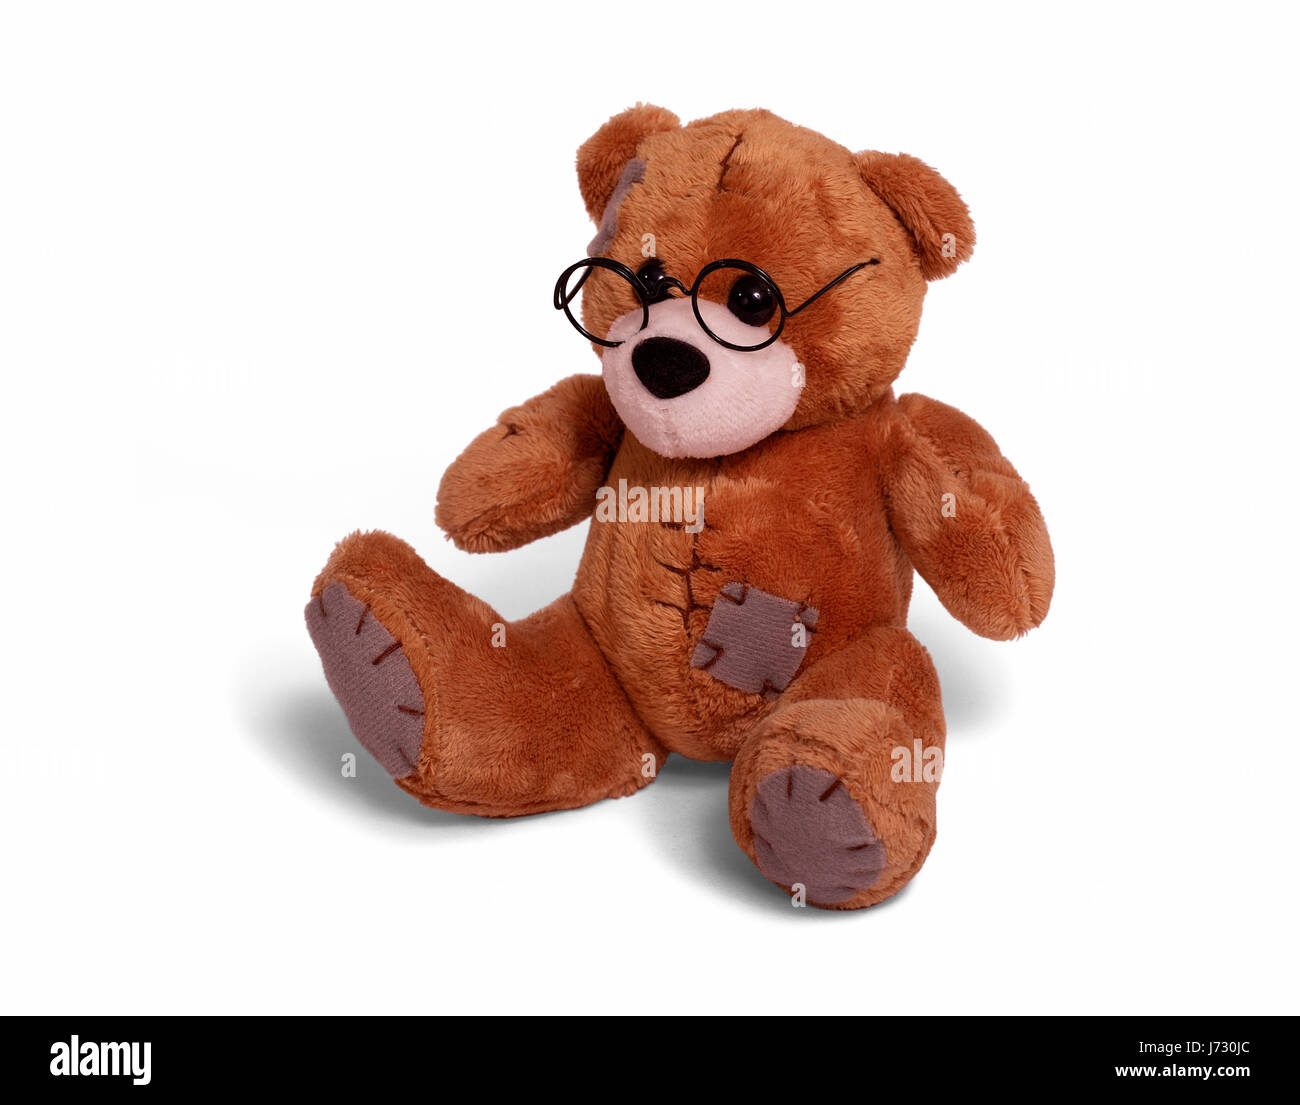 bear soft teddy spectacles glasses 